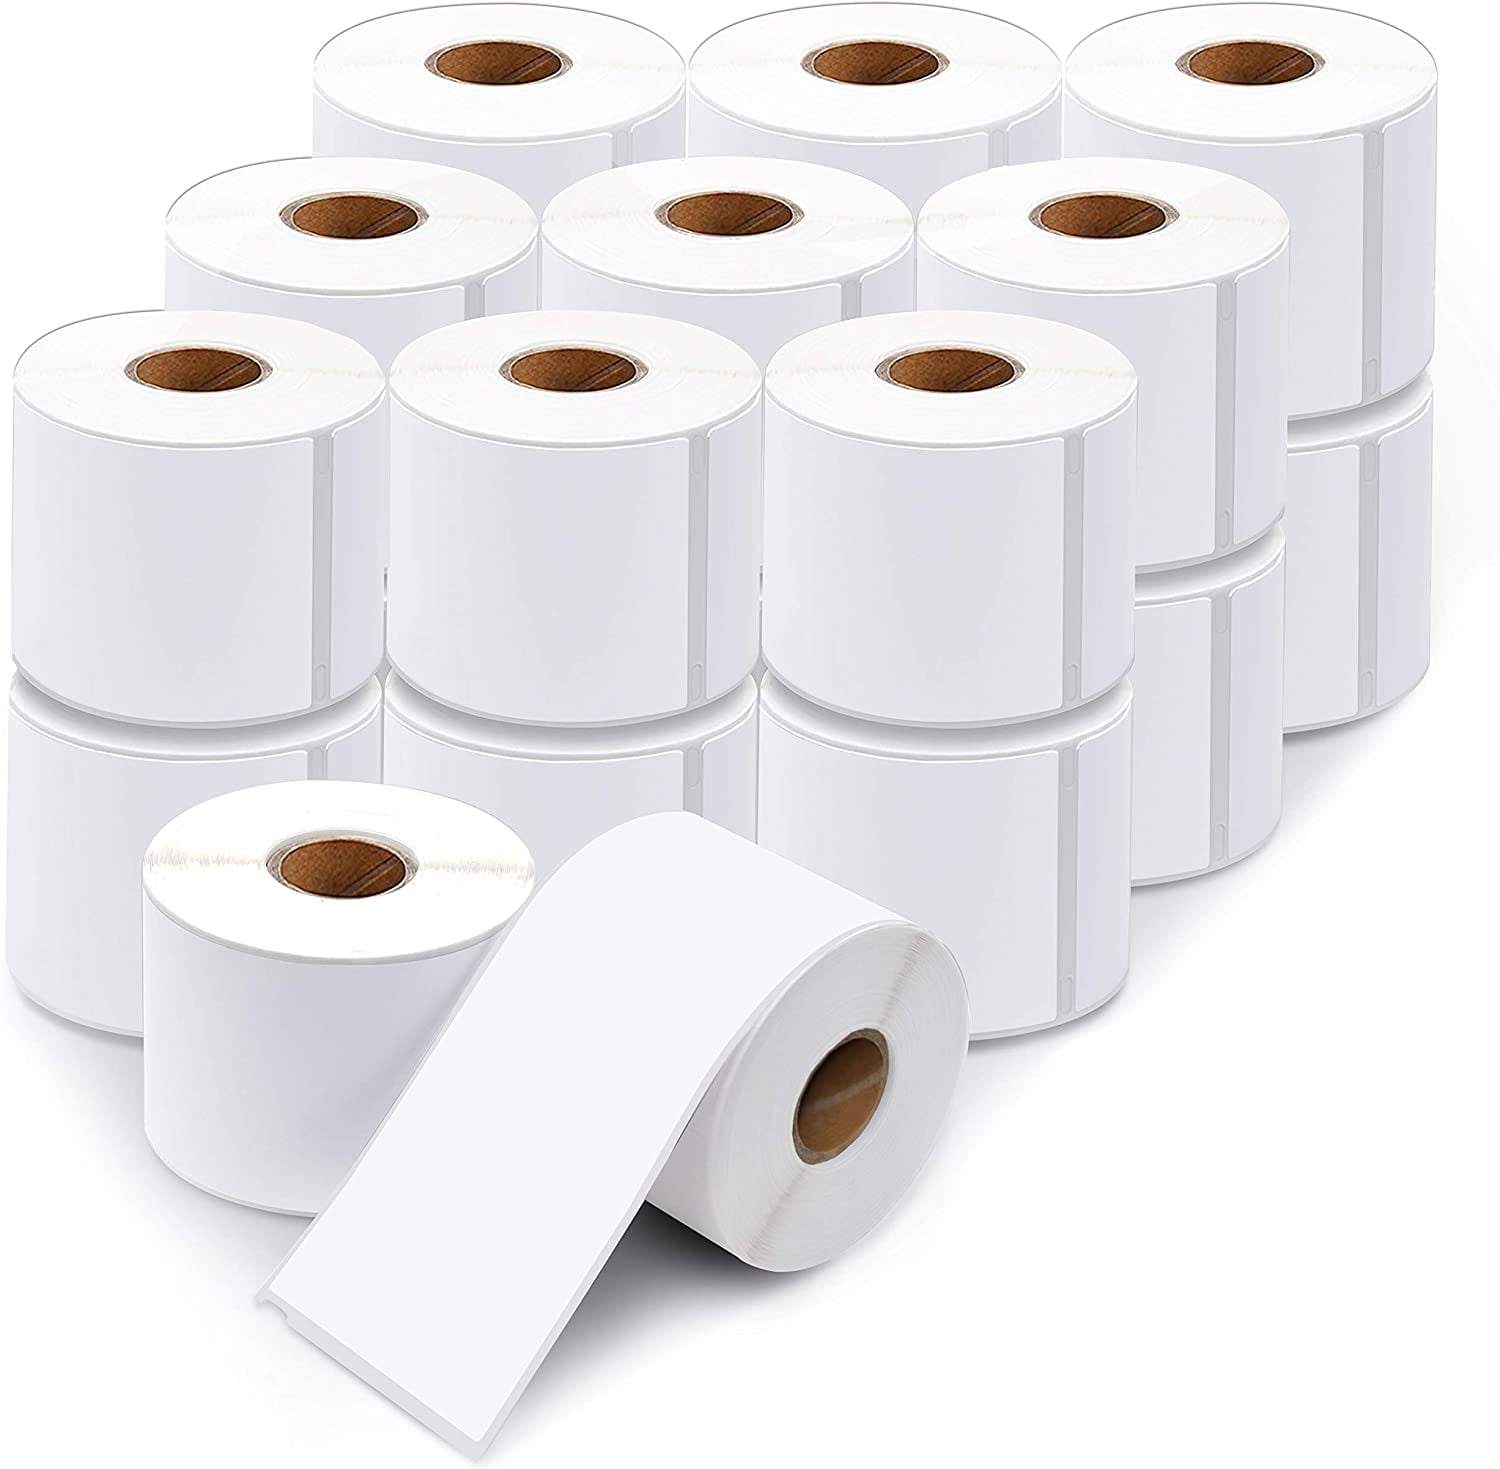 20 ROLL COMPATIBLE Dymo 30256 Label 59mm x 102mm S0719190